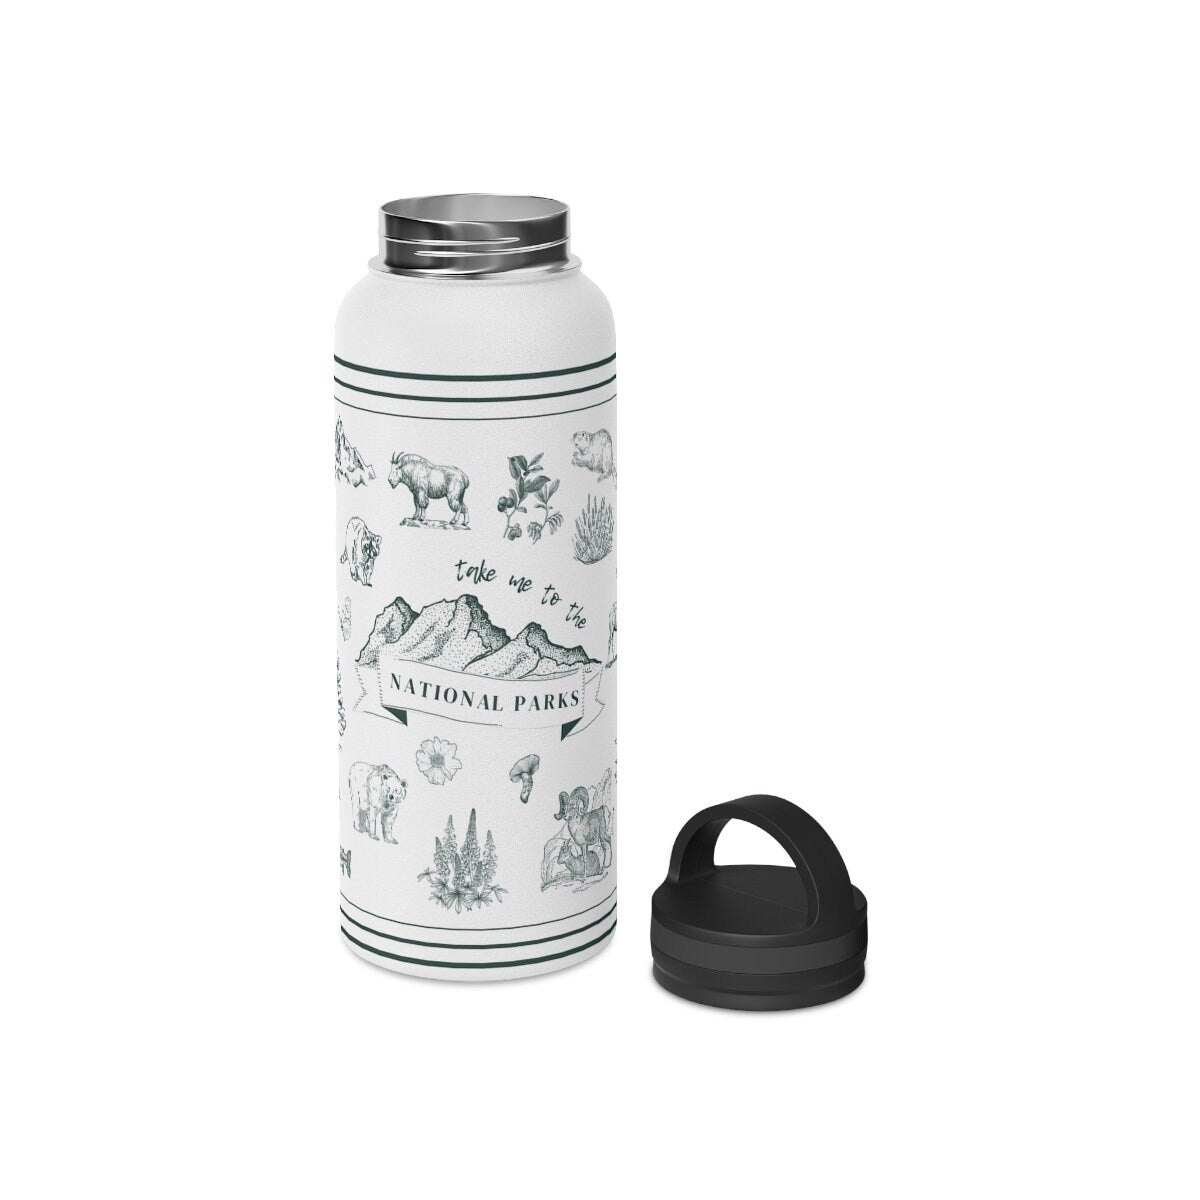 National Parks Insulated Water Bottle 32ozCelebrate your favorite national treasure everyday with this 32 oz insulated water bottle.
Perfect for road trips, camping, backpacking, and everyday use!
Capacity: 